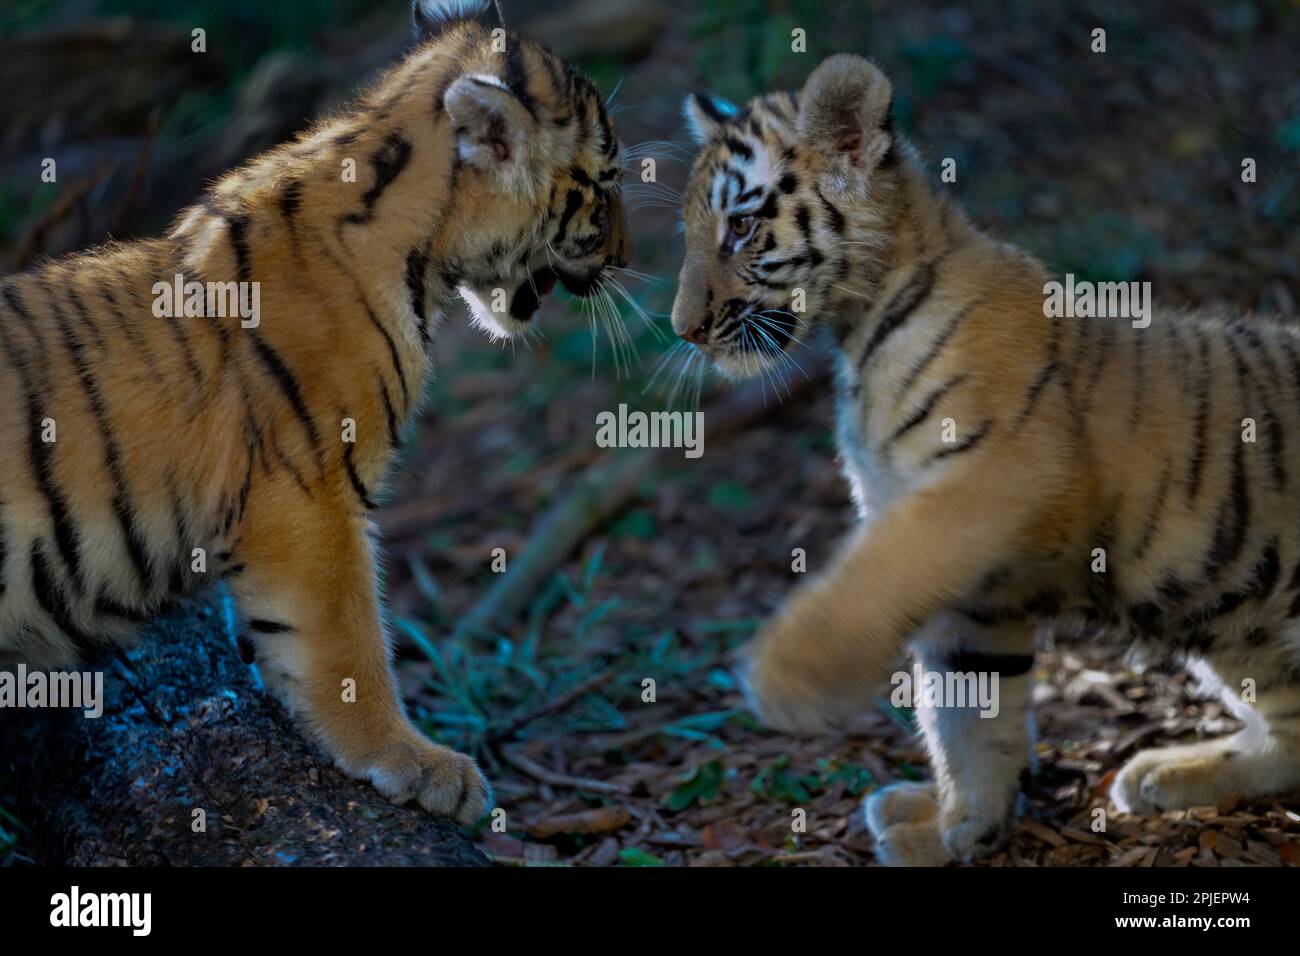 An adorable shot of two baby tigers frolicking in a lush forest Stock Photo